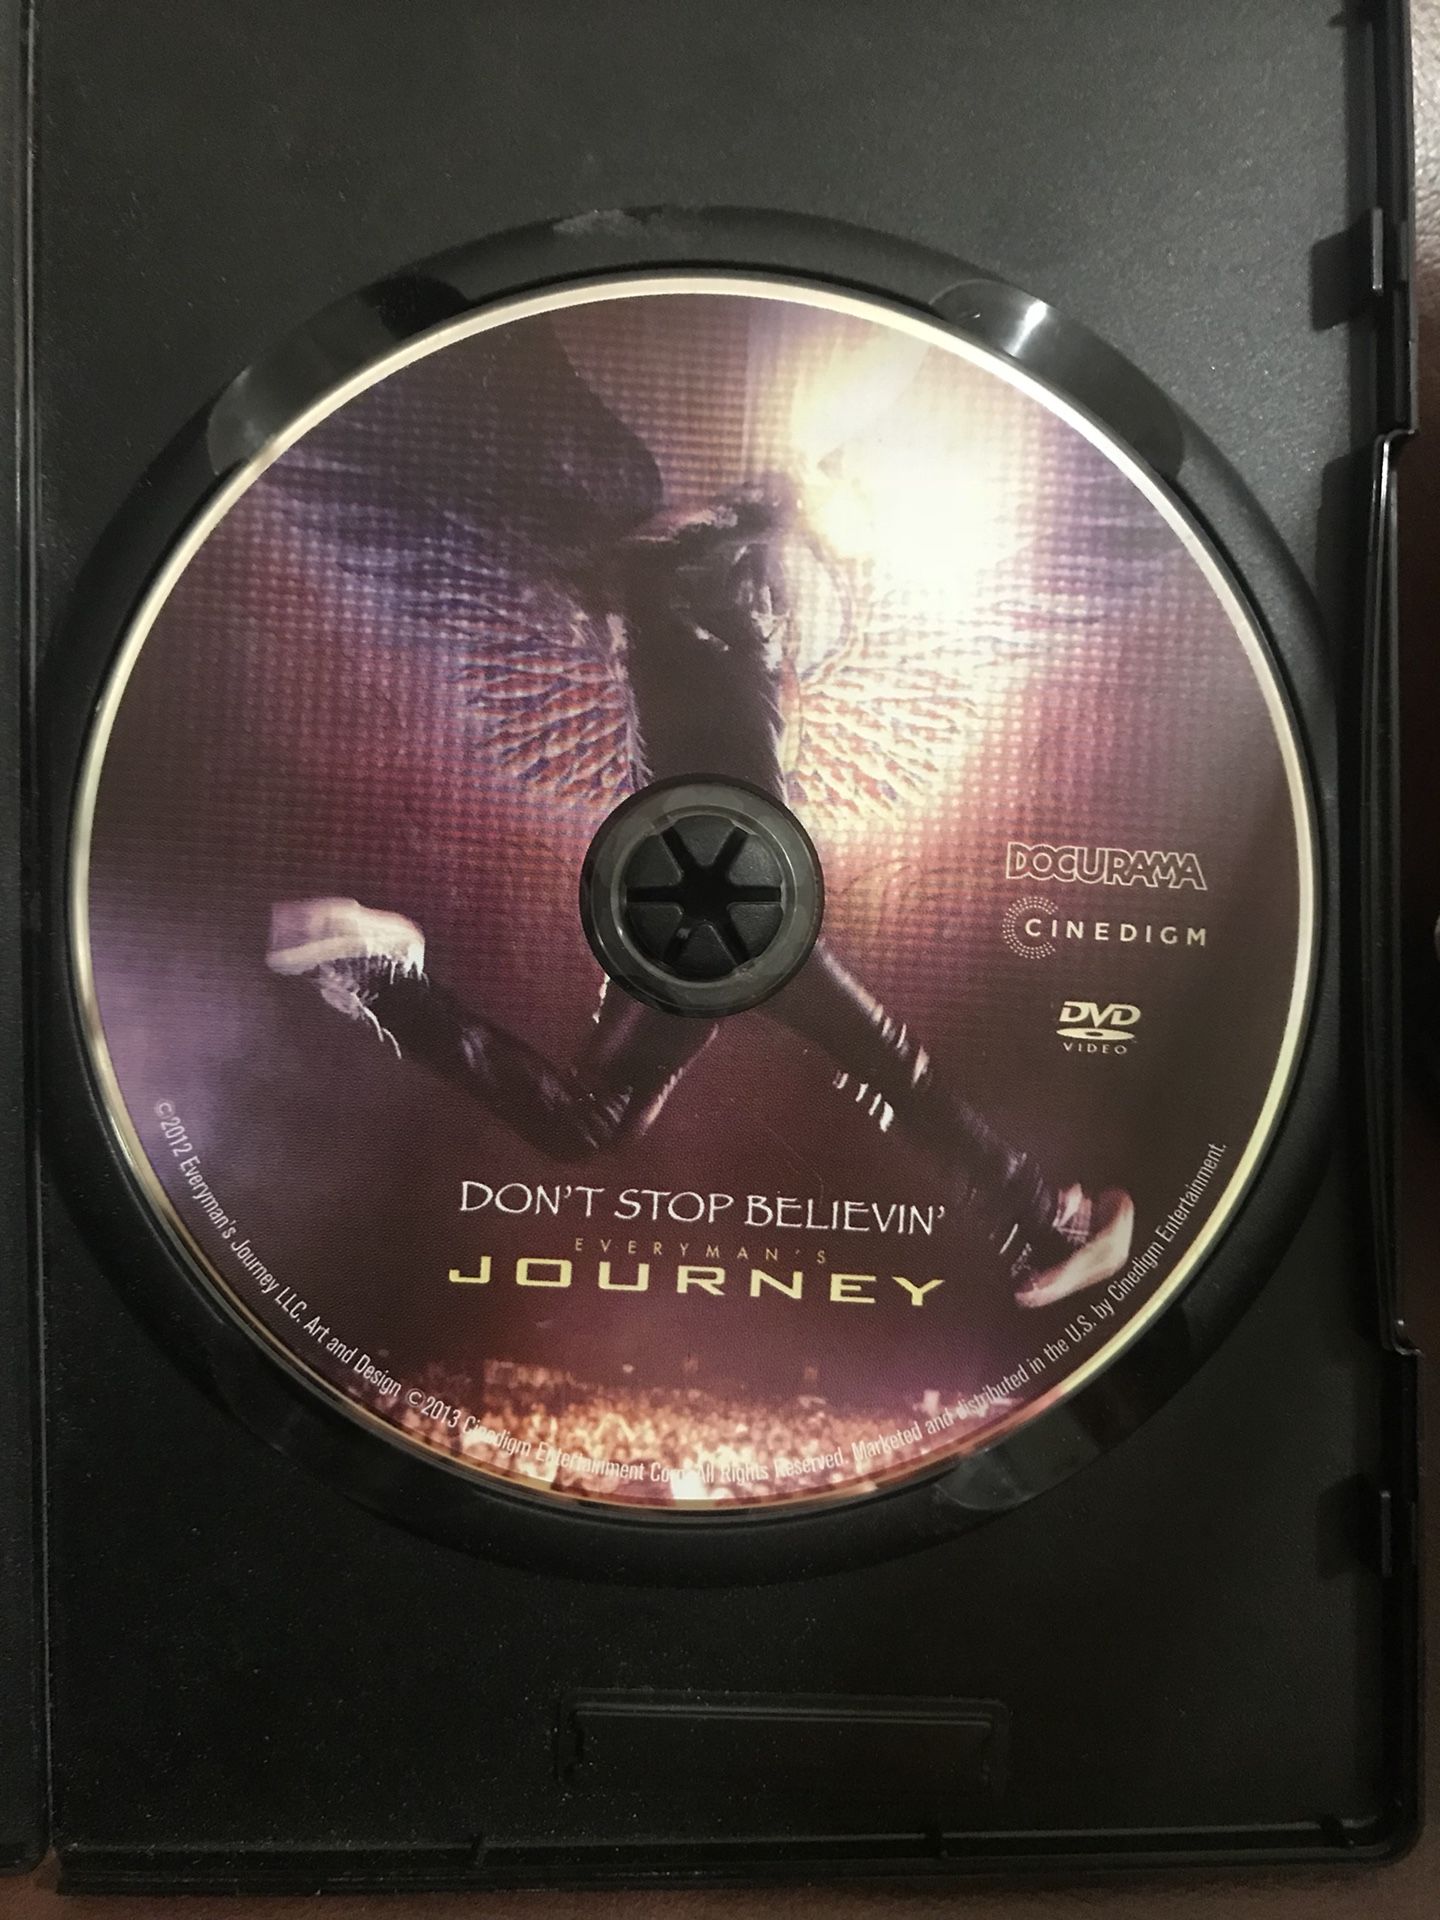 DON'T STOP BELIEVIN': EVERYMAN'S JOURNEY (DVD 2013) Not In Original Case but in a black dvd case. Condition is Very good